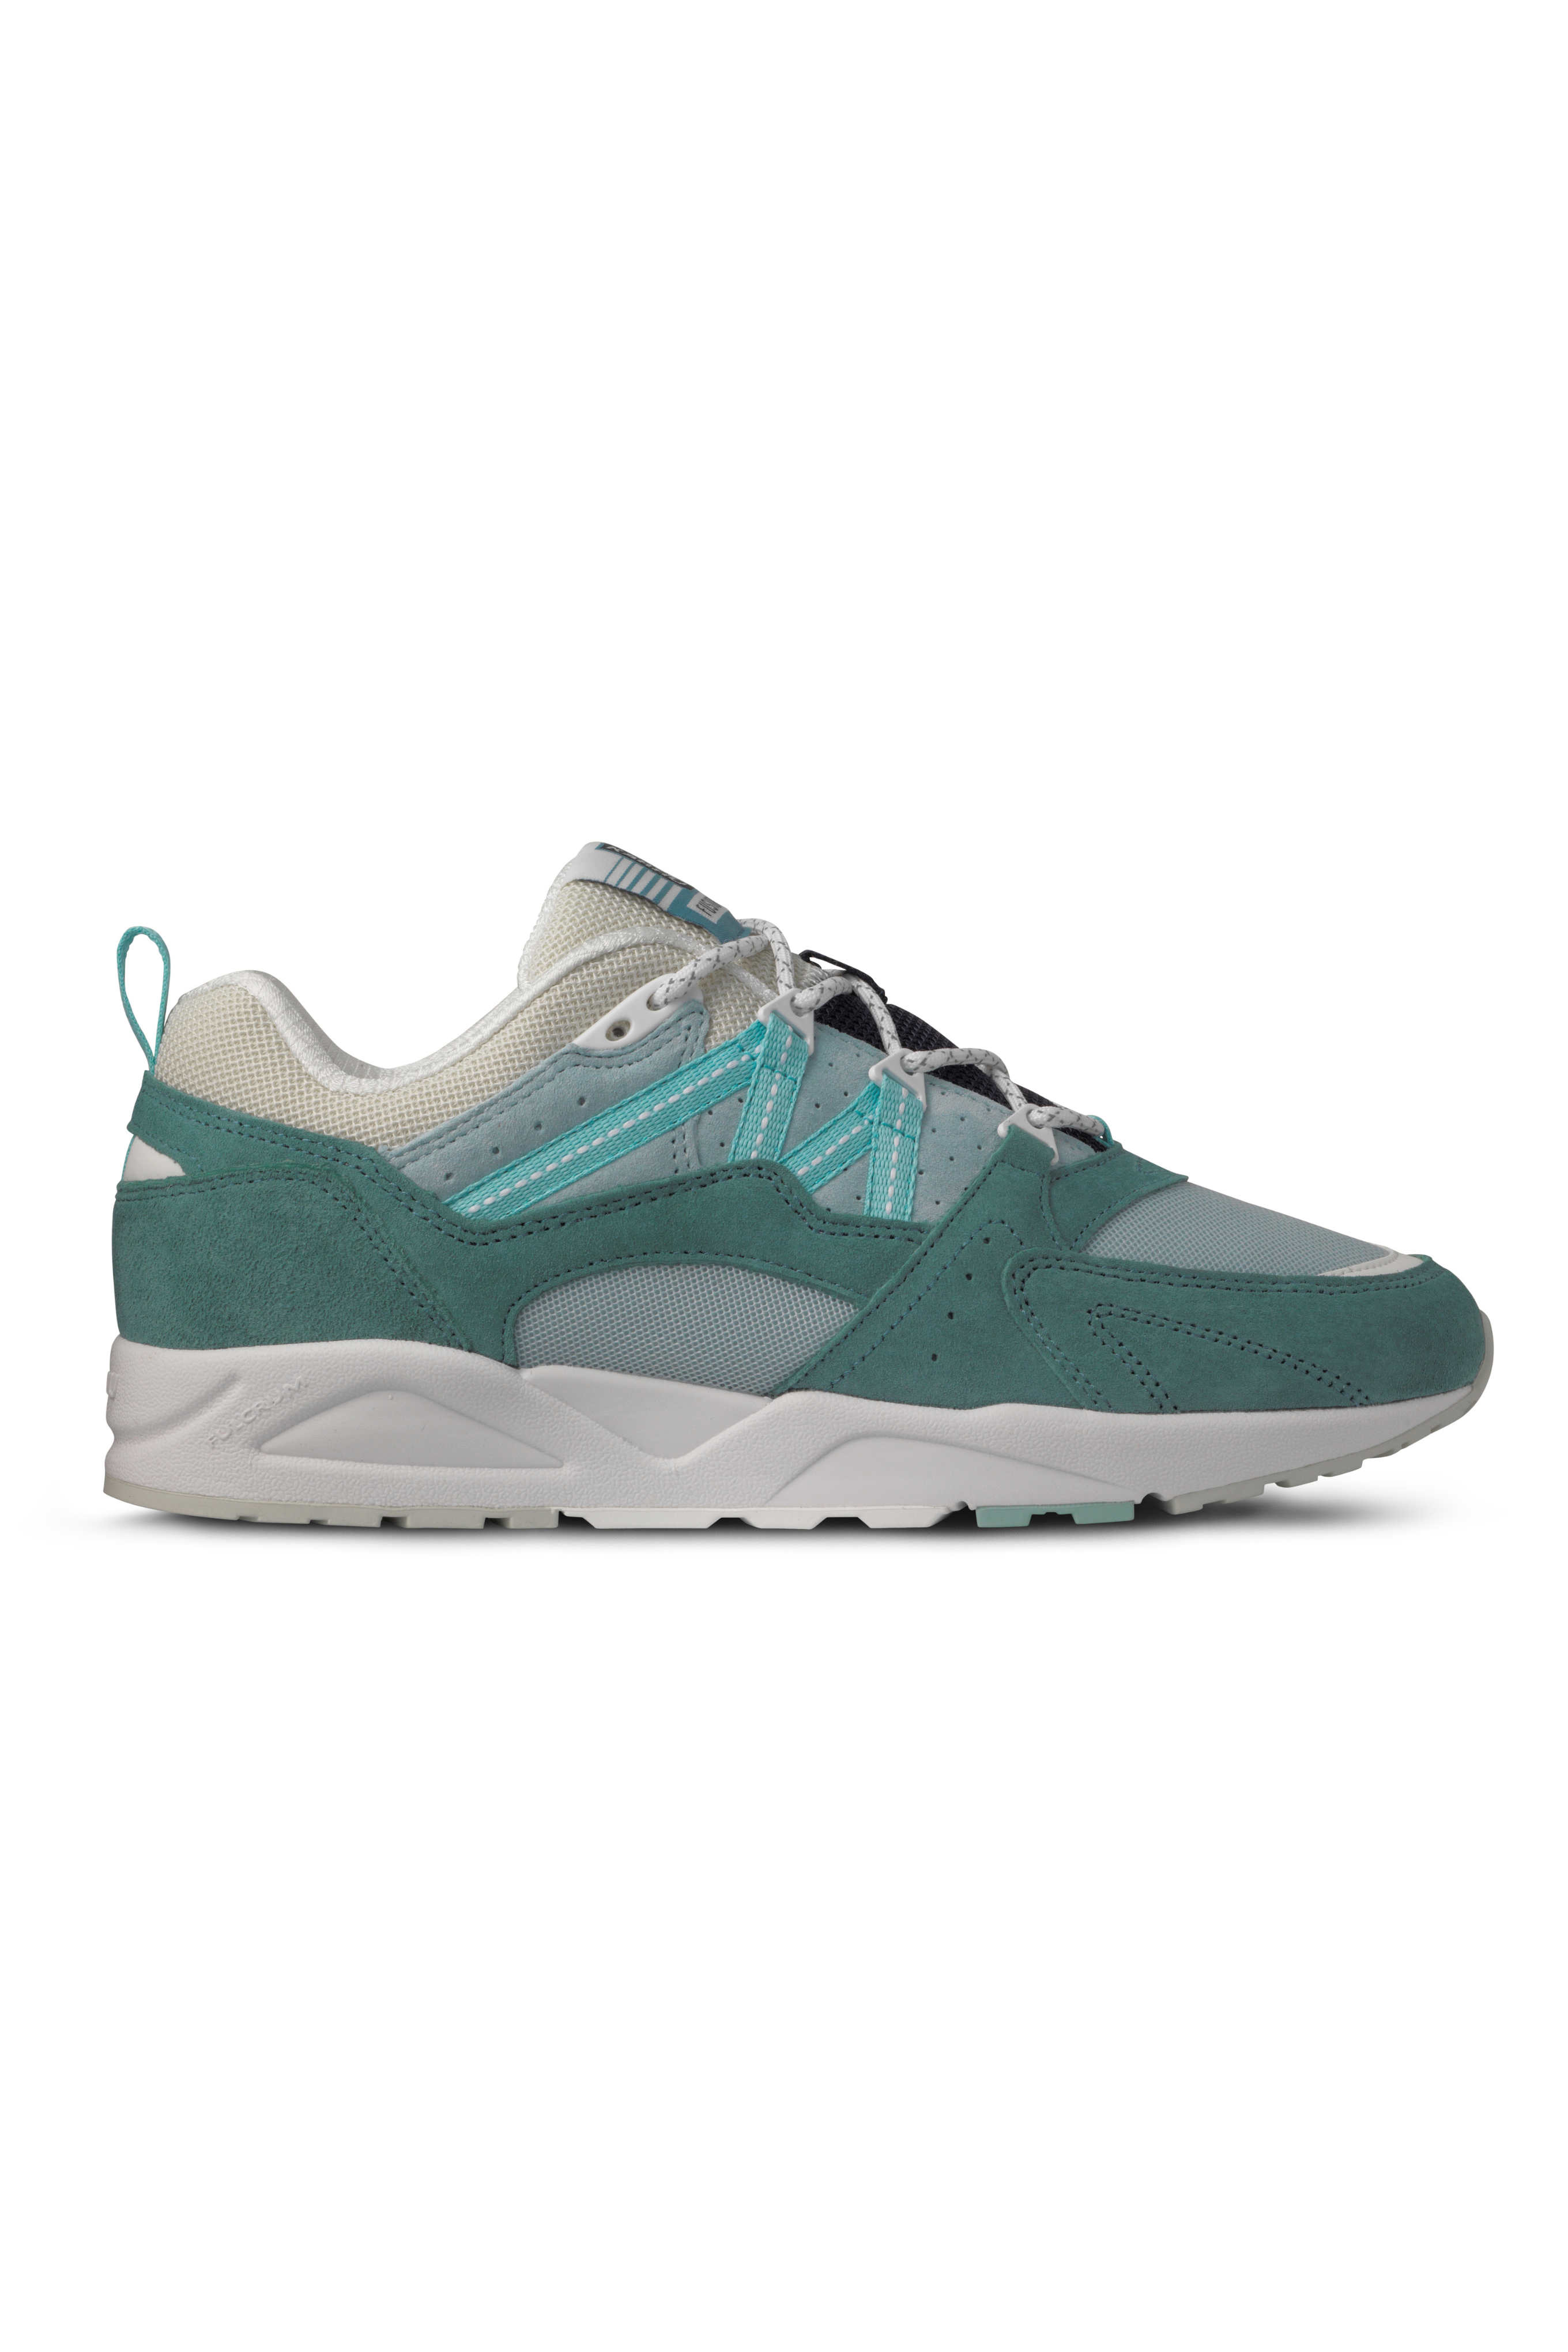 FUSION 2.0 SNEAKER - MINERAL BUE / PASTEL TURQUOISE